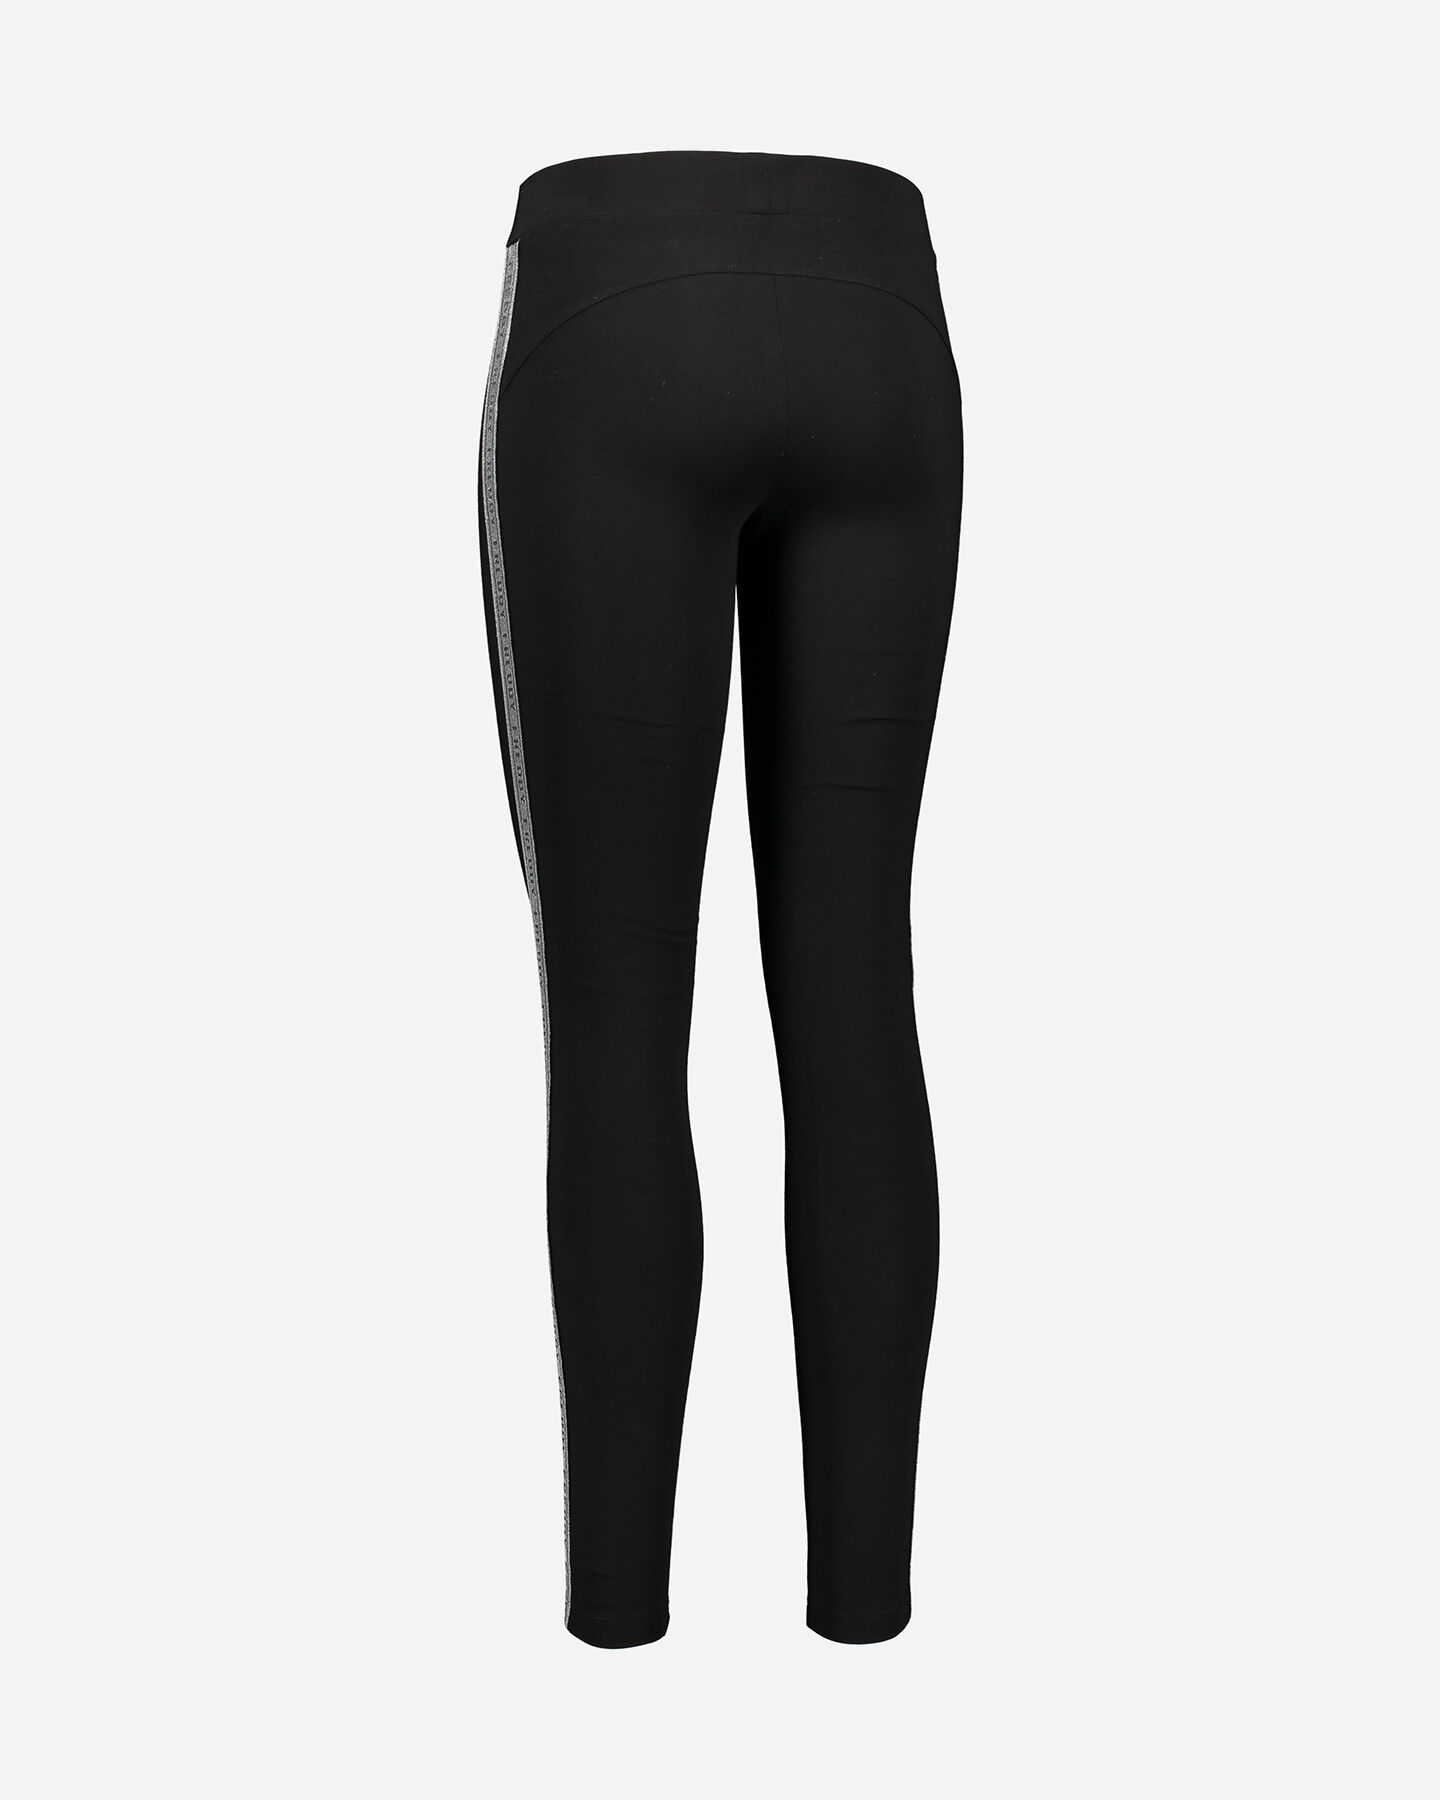  Leggings FREDDY JSTRETCH TAPE PAIELLETTES W S5297601|N-|XS scatto 2